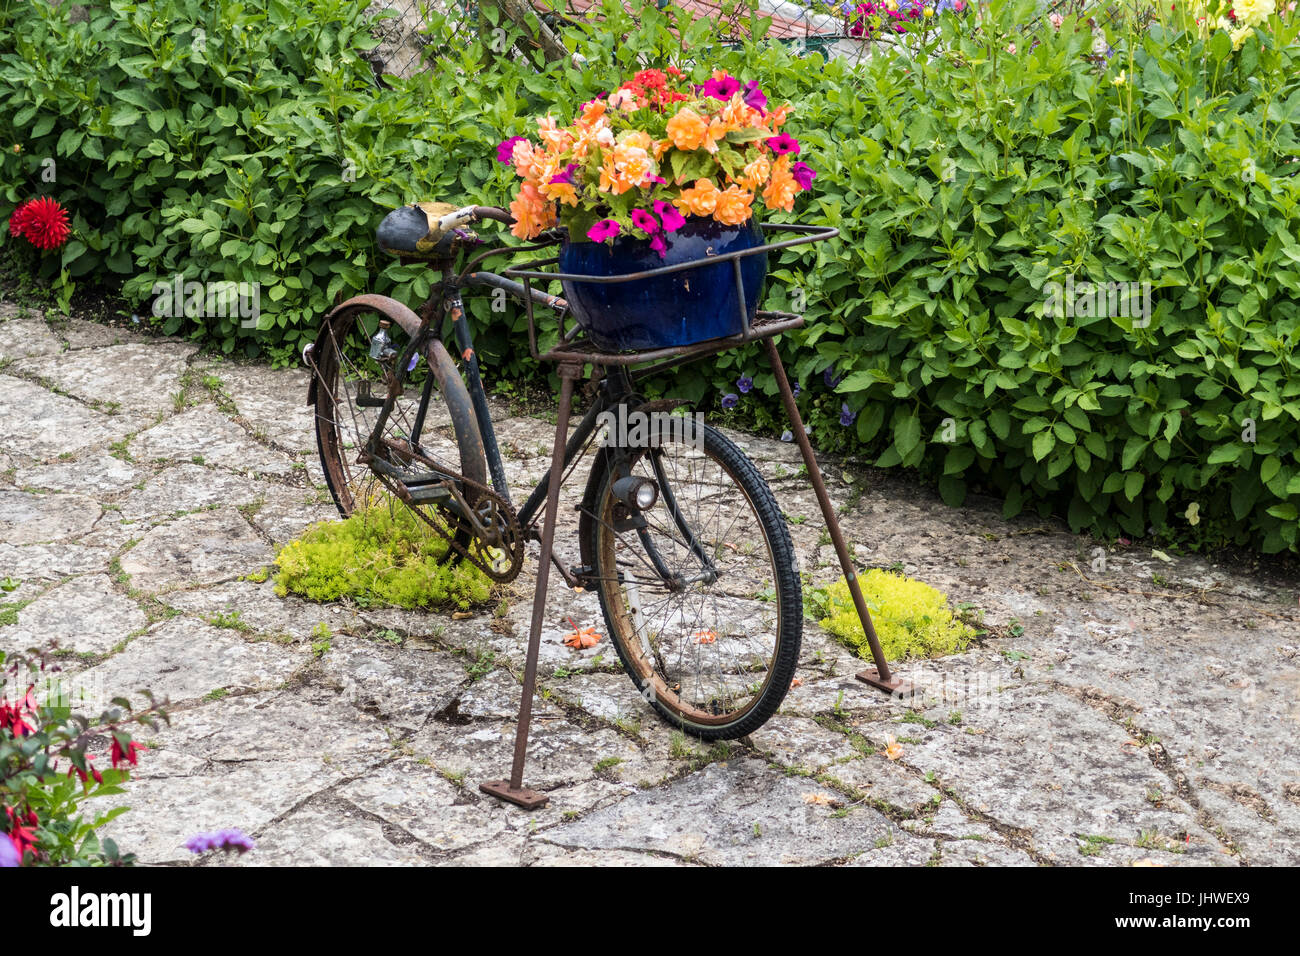 An old rusty bicycle used as a flower container, flower pot, floral display. Stock Photo